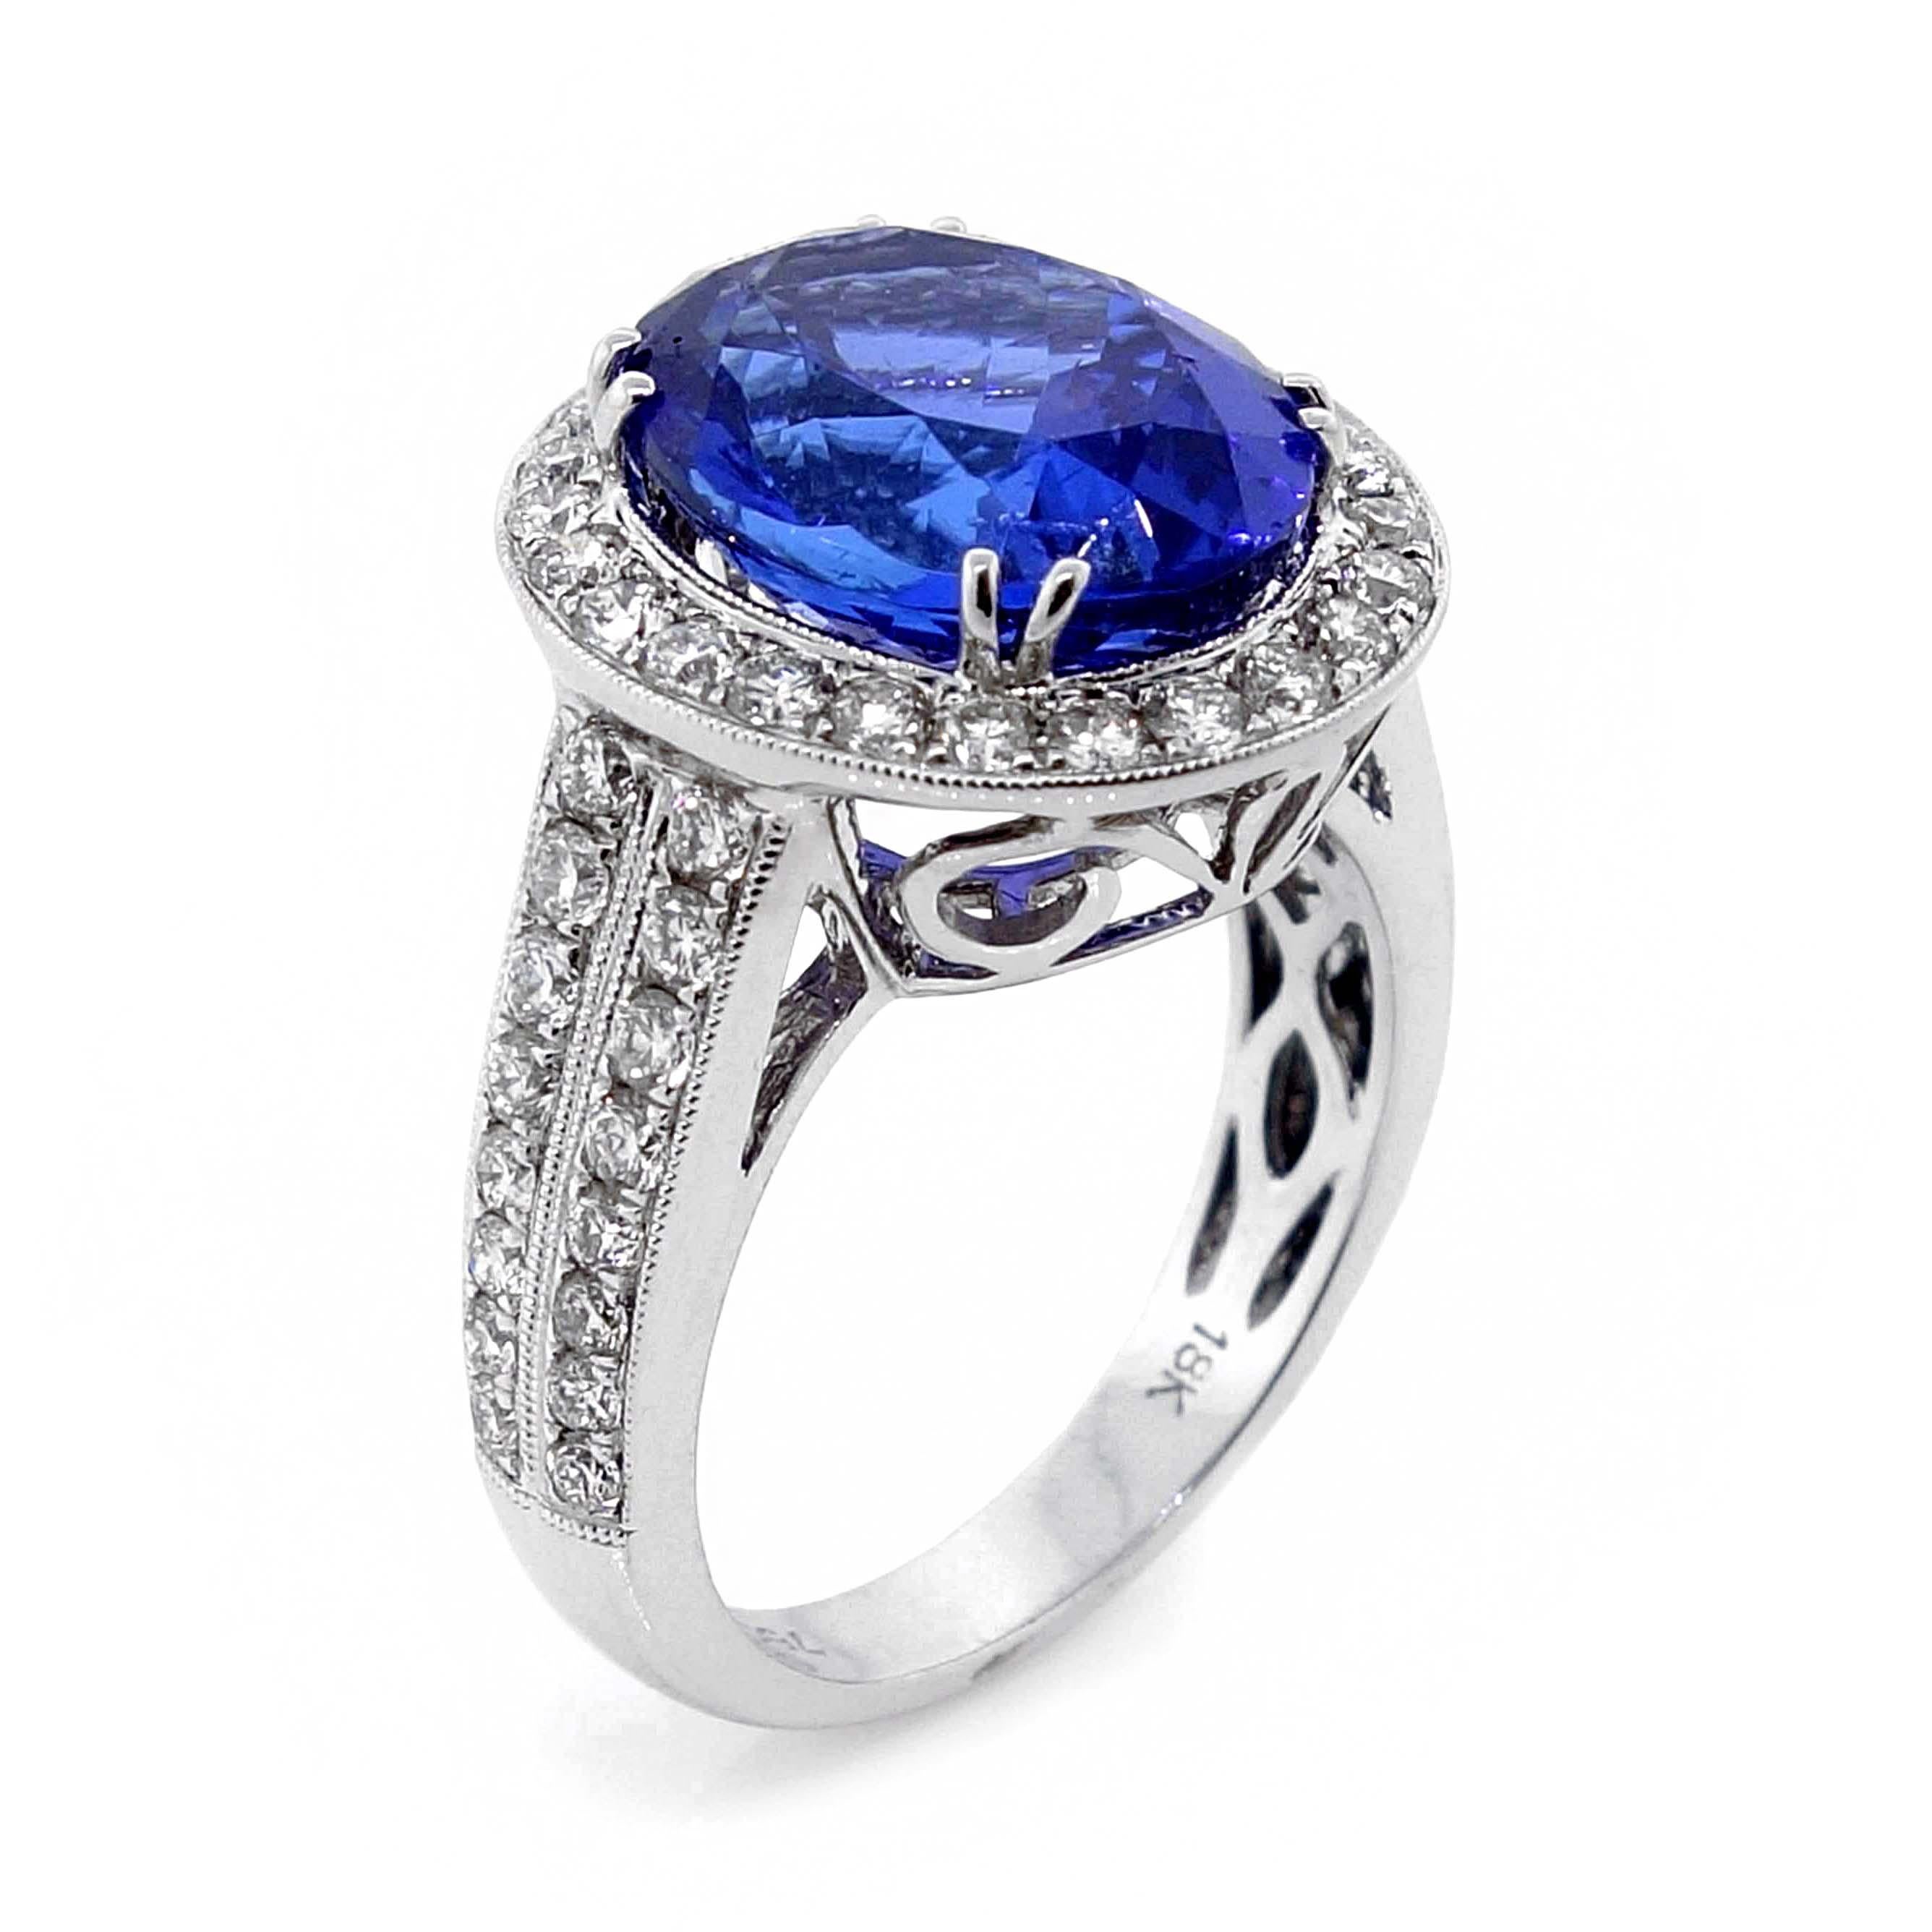 Ring with one oval tanzanite of about 5.65 carats measuring 12.28×9.70×6.74mm. The tanzanite is surrounded by 56 round brilliant cut diamonds of about 1.03 carats with a clarity of SI and color G. All stones are set in 18k white gold. The total